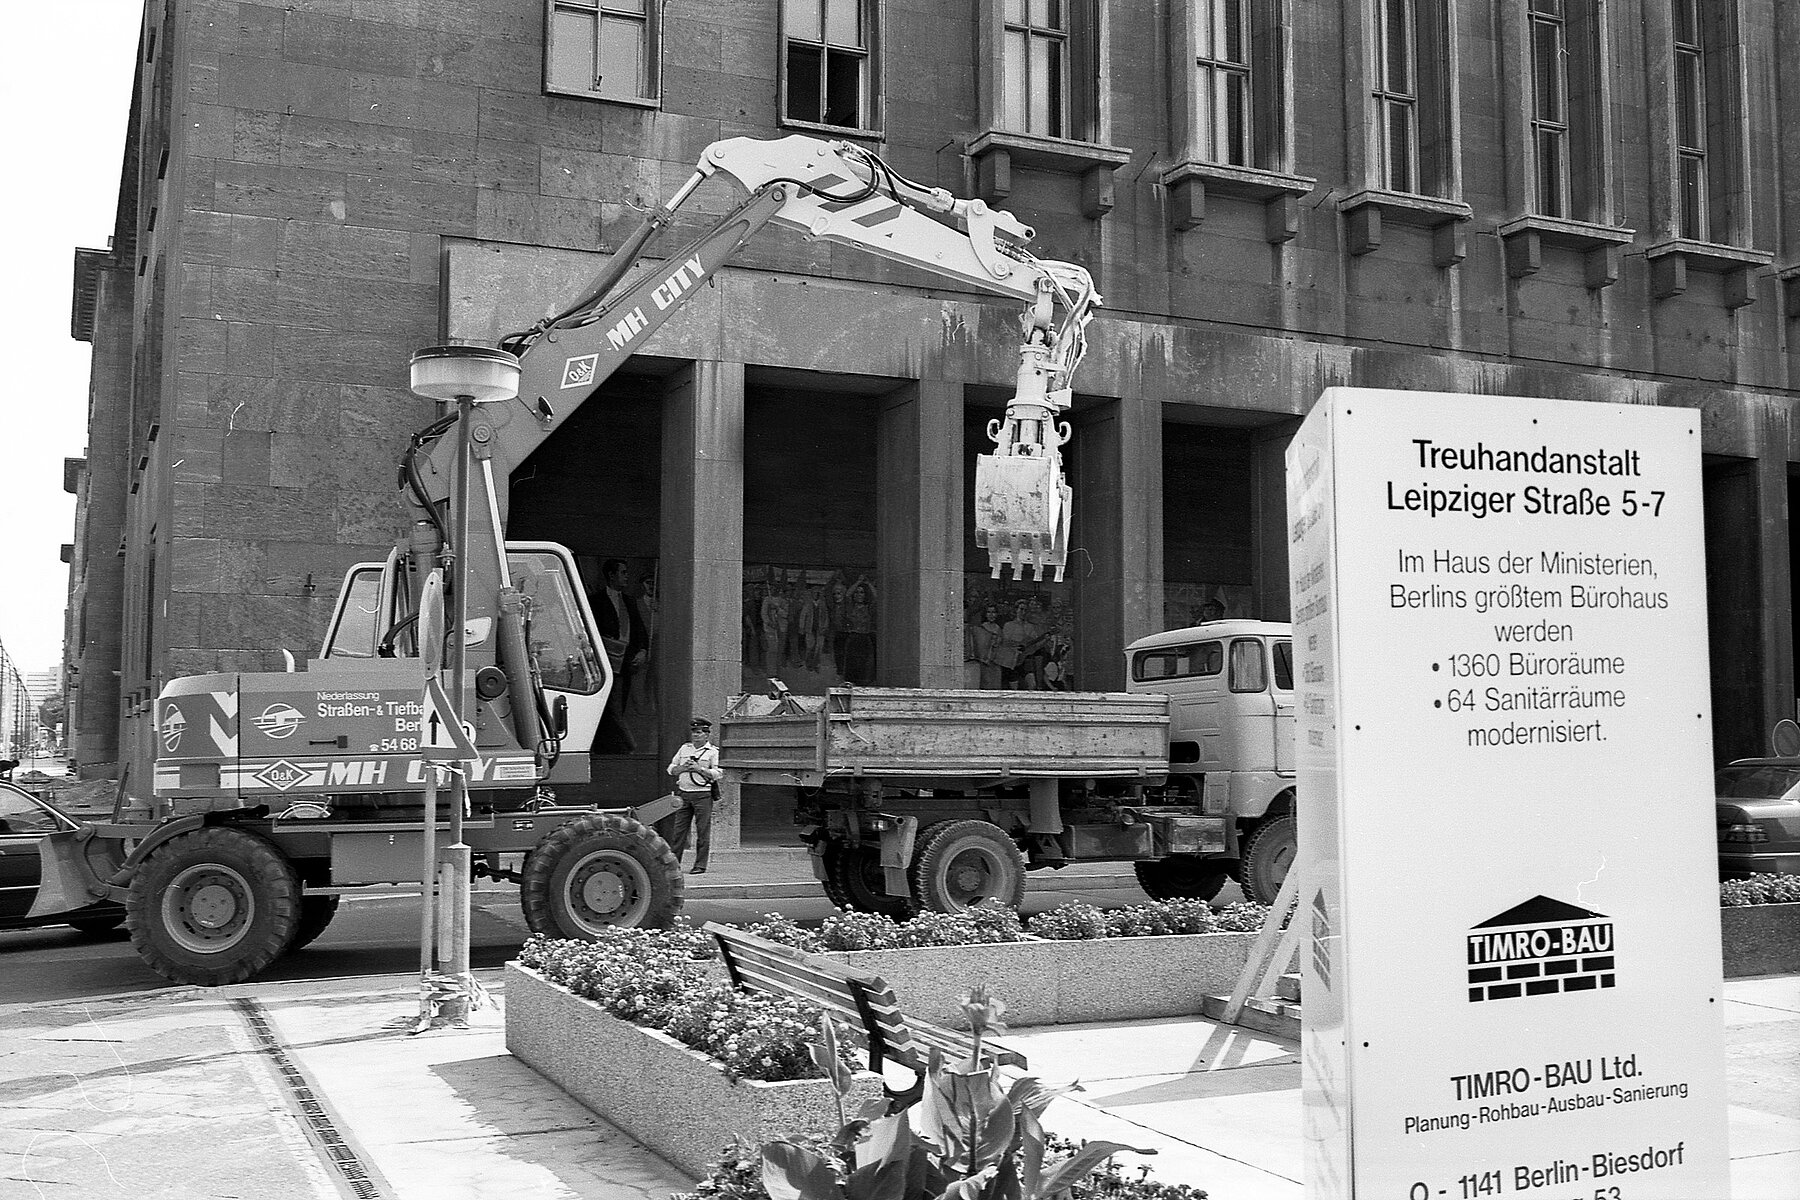 Construction work in front of the headquarters of the Treuhandanstalt.